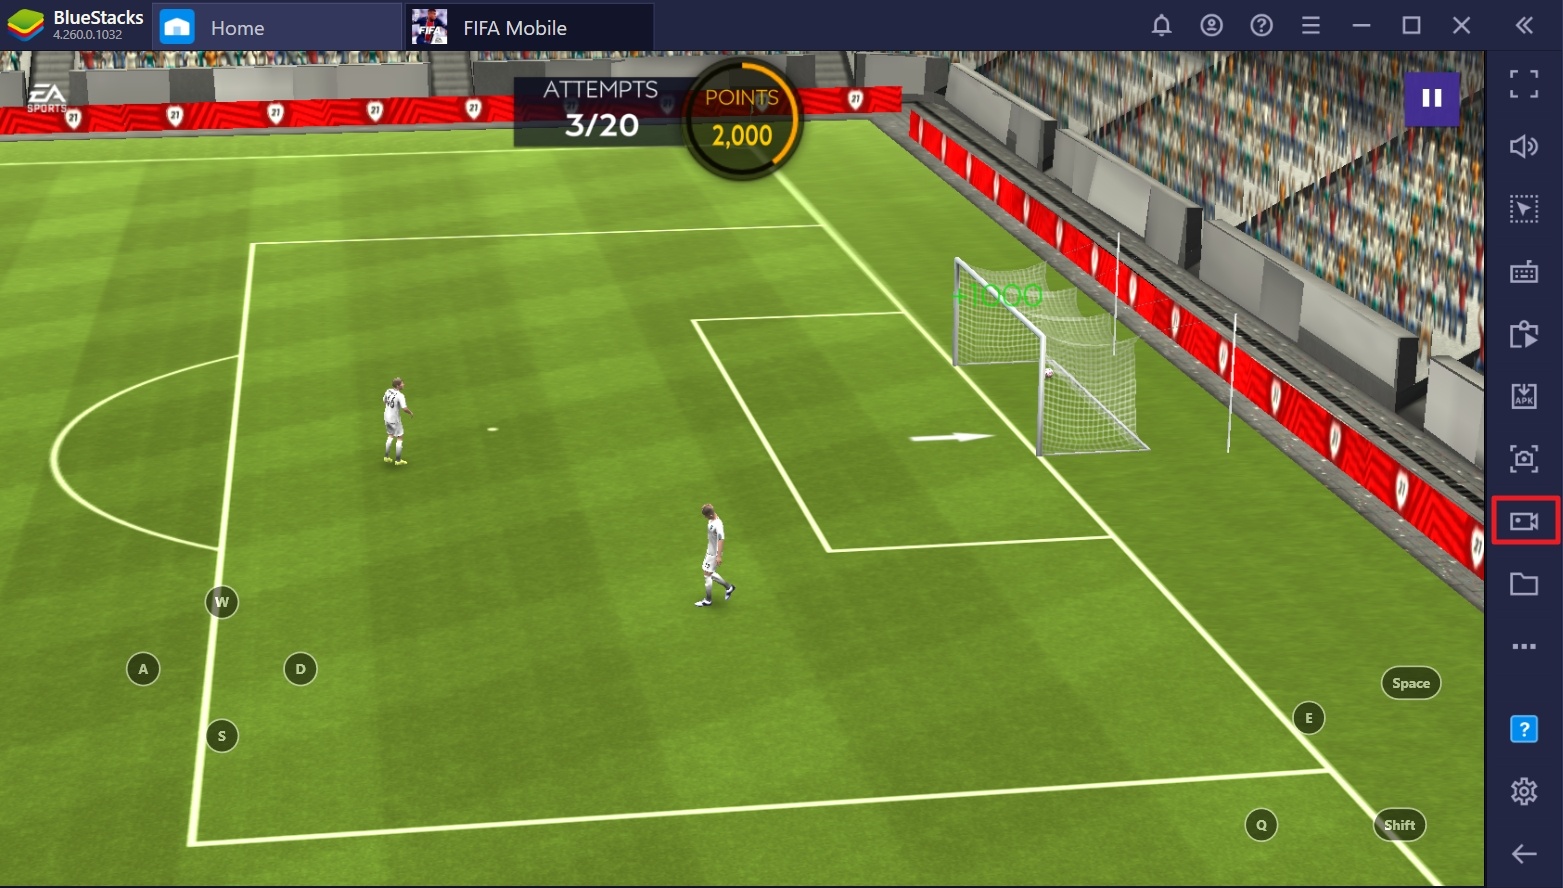 Build Your Ultimate Team in EA SPORTS FC MOBILE 24 SOCCER on PC with BlueStacks